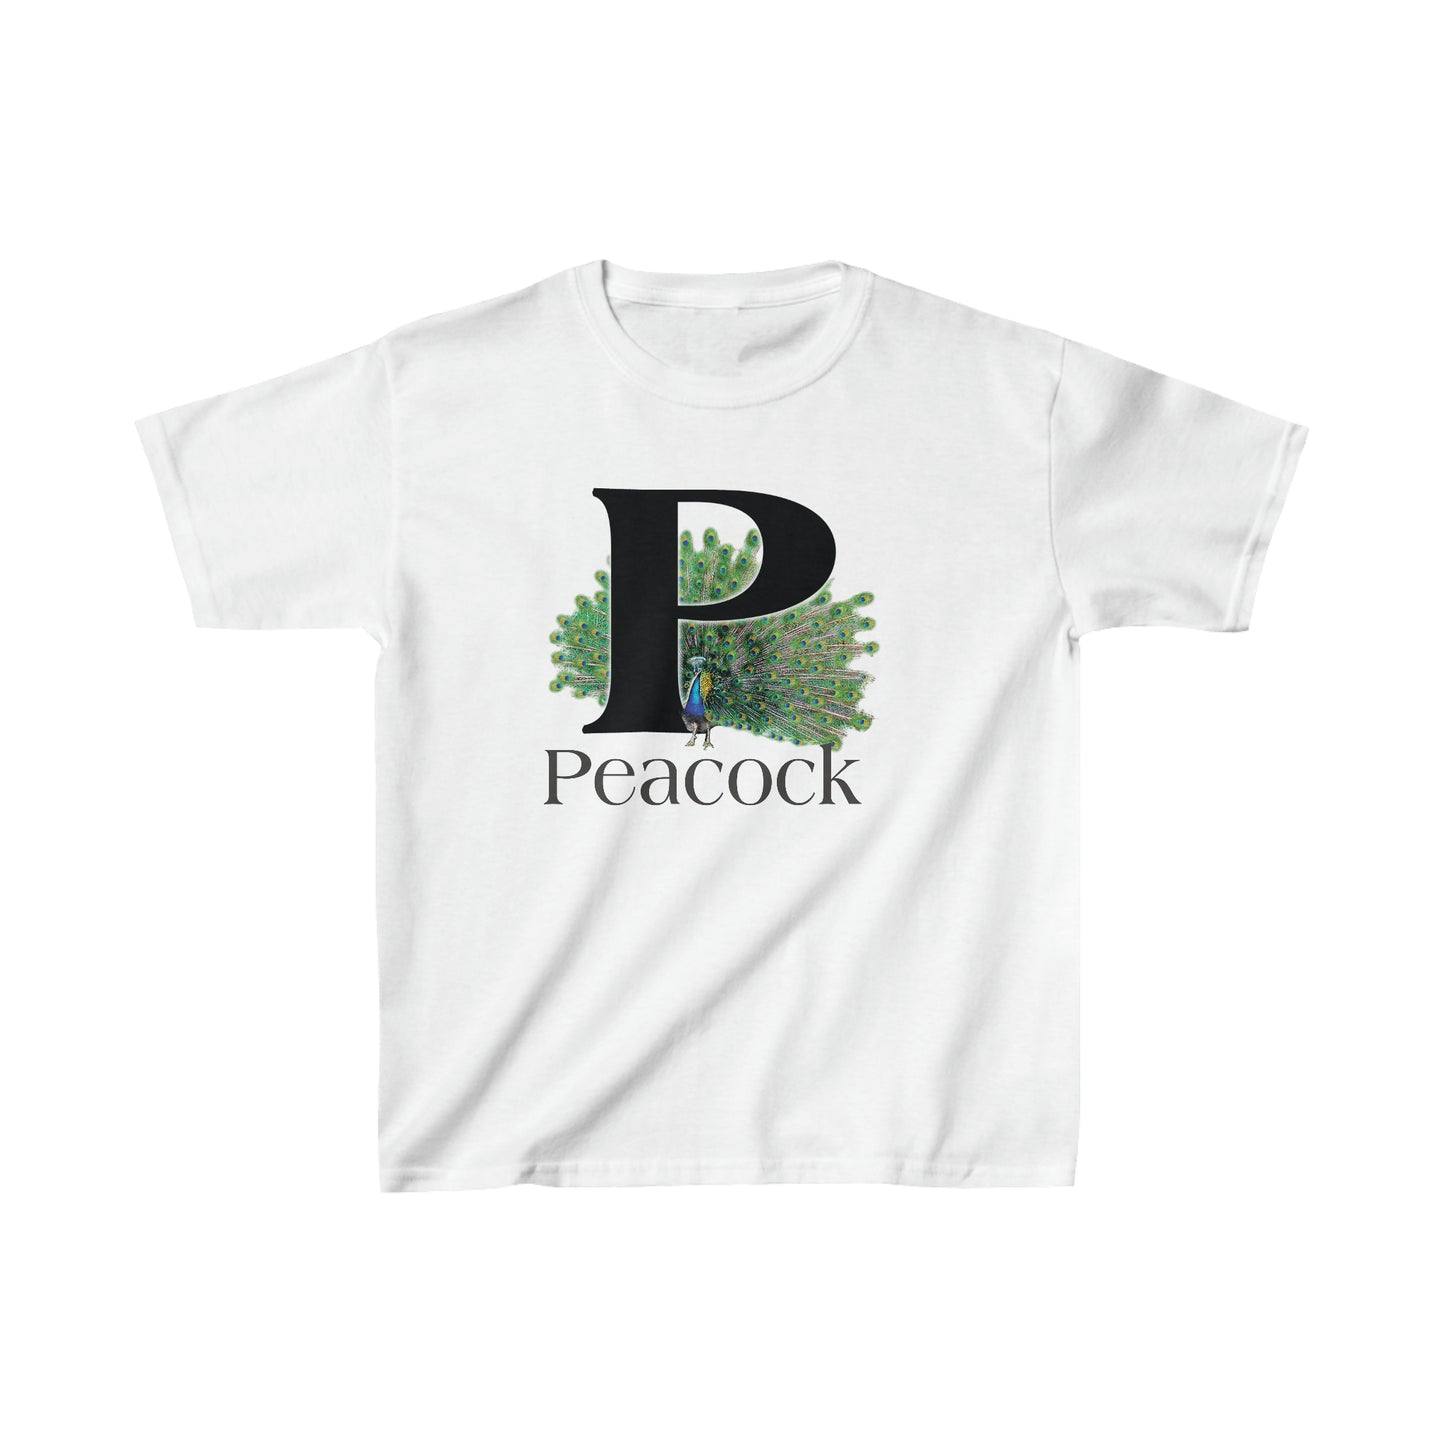 Peacock Letter P T-Shirt, Peacock Feathers Fanned out, Bird Shirt, Drawing T-Shirt, animal t-shirt, animal alphabet T, animal letters